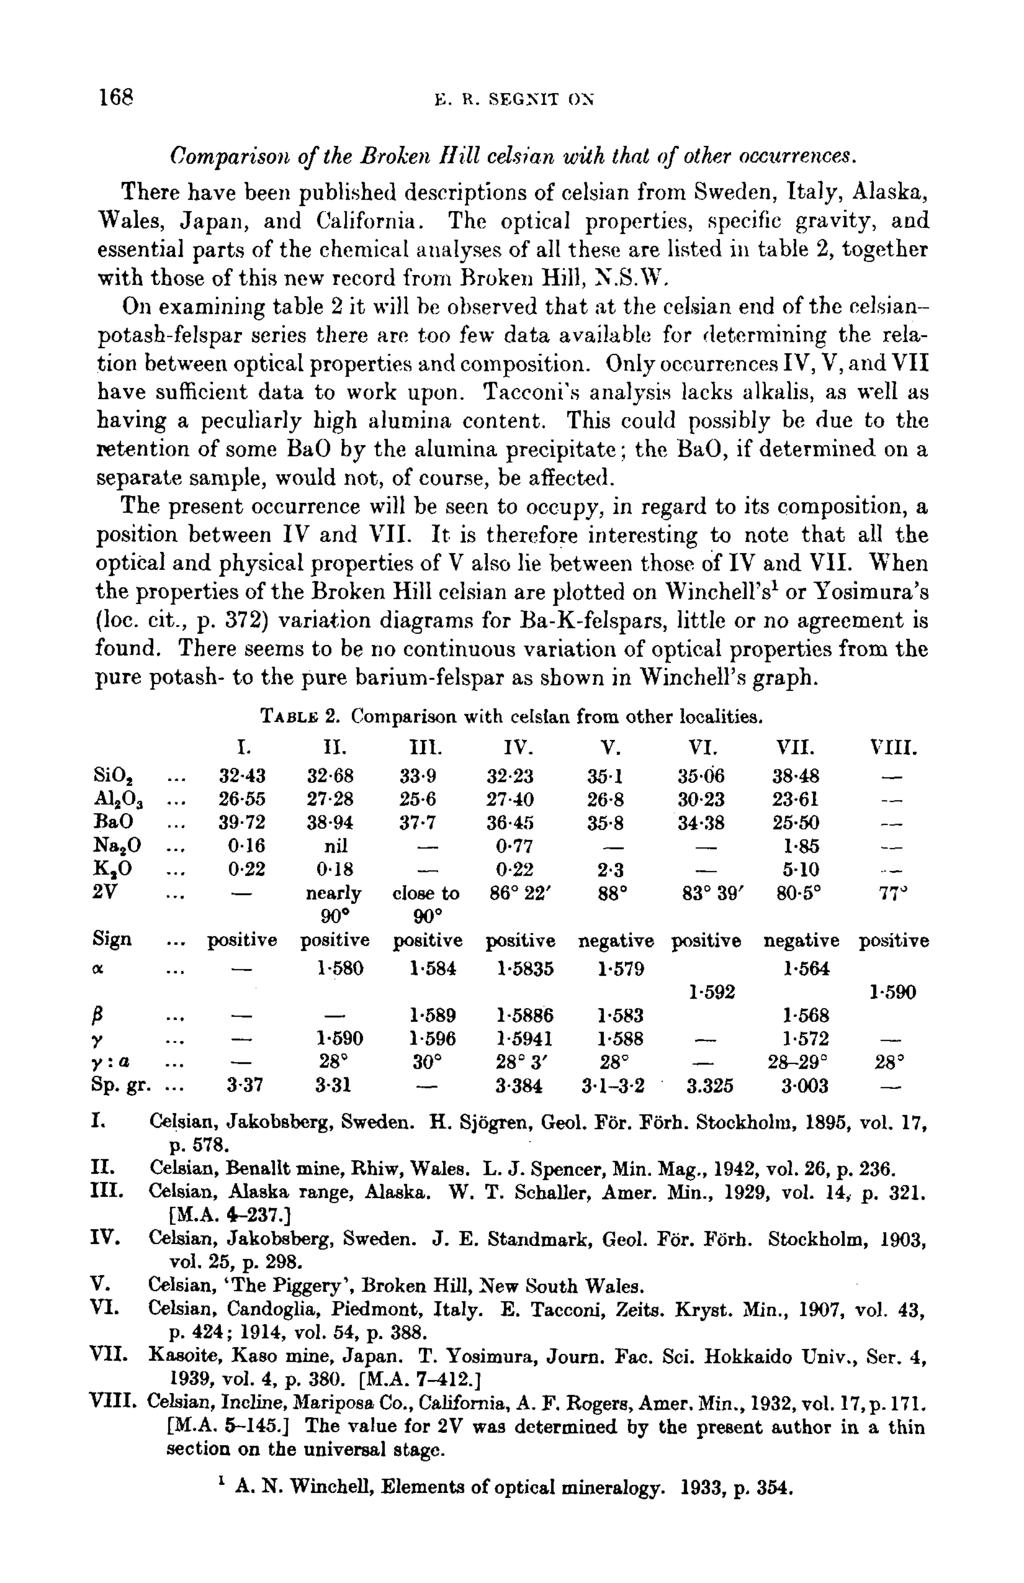 168 ~;. R. SEGNIT ON Comparison of the Broken Hill celsian with that of ot~r occurrences. There have been published descriptions of celsian from Sweden, Italy, Alaska, Wales, Japan, and California.